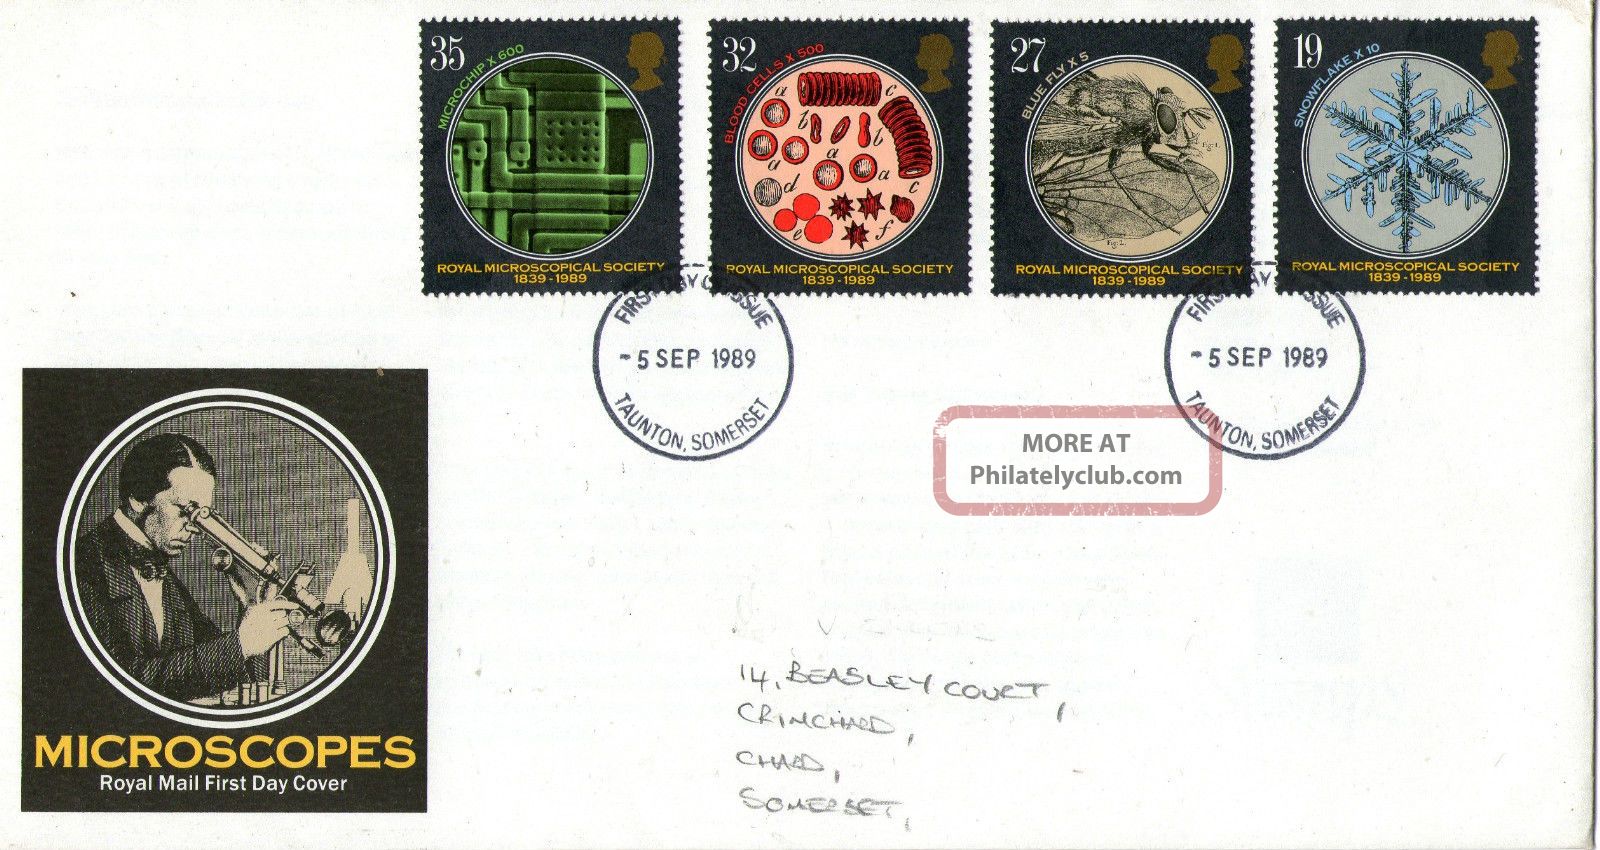 5 September 1989 Microscopes Royal Mail First Day Cover Taunton Fdi Organizations photo